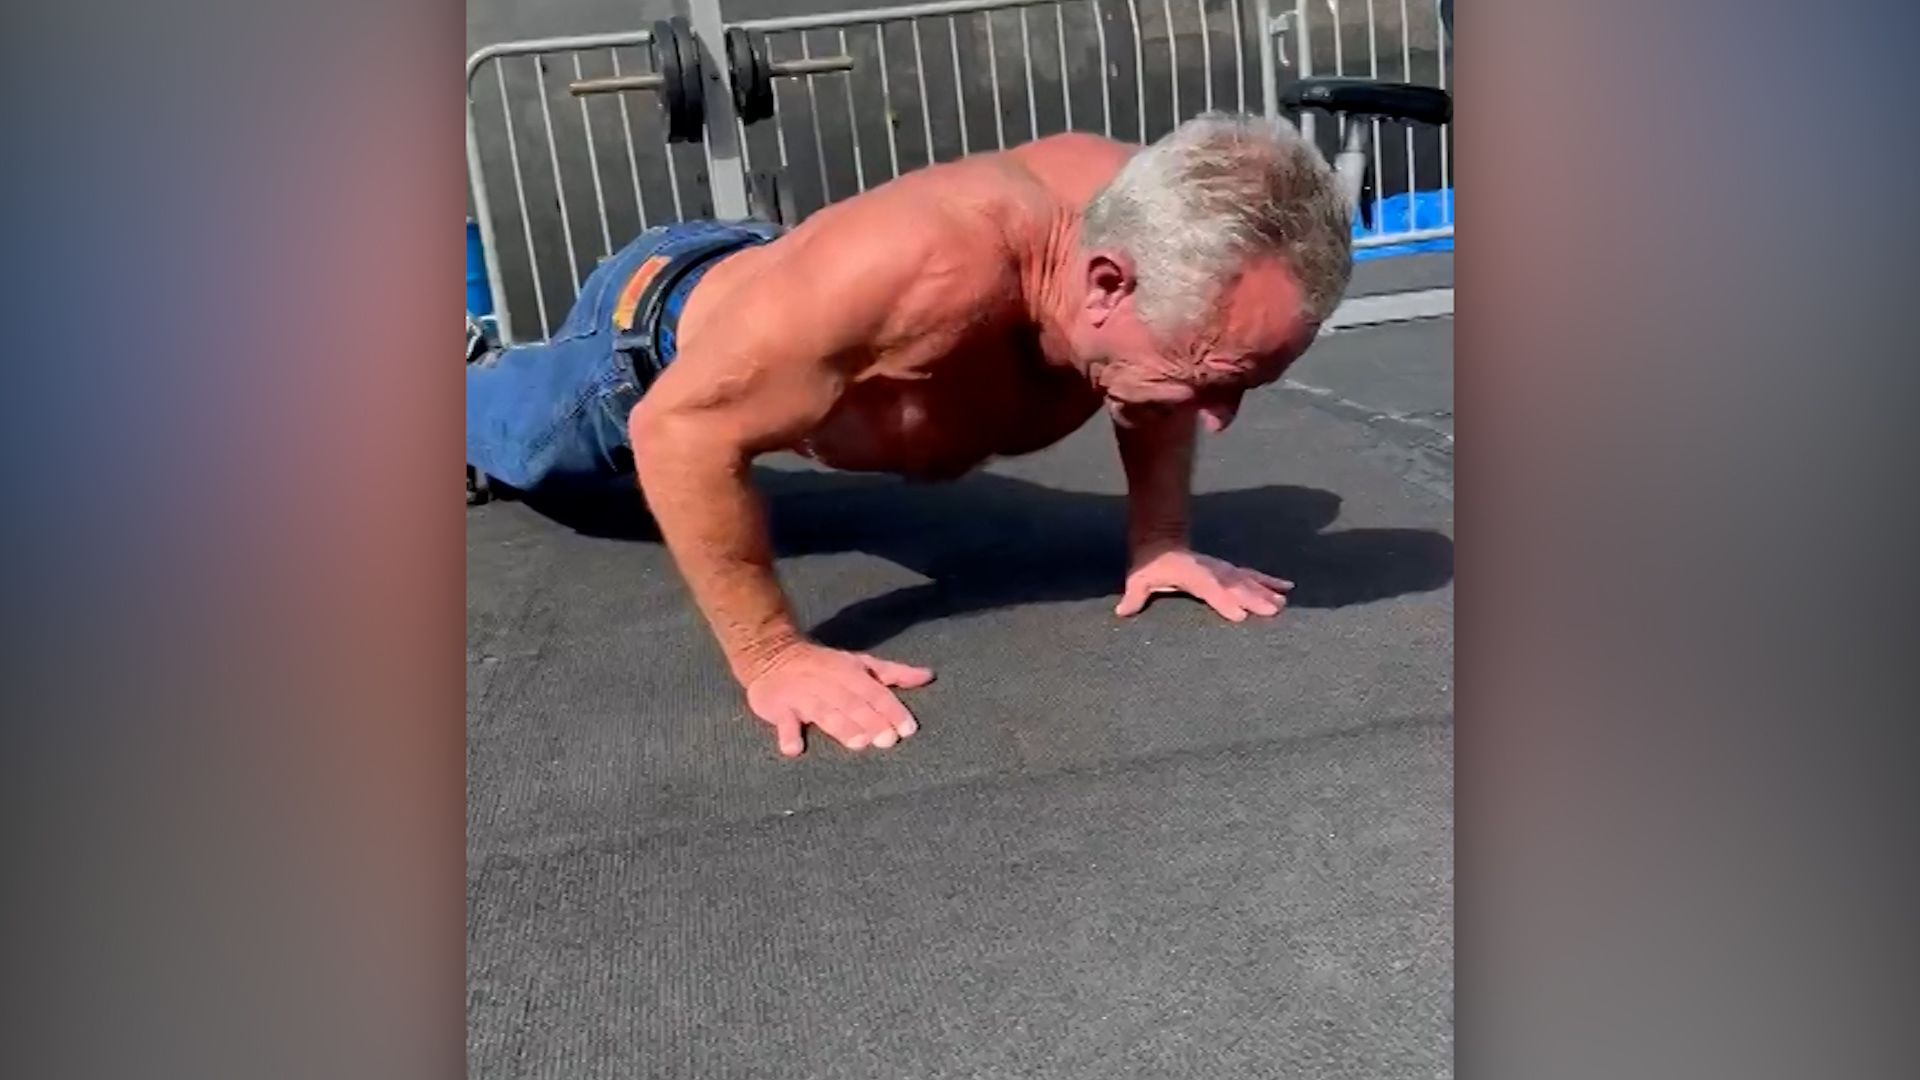 Shirtless presidential candidate has the internet gawking